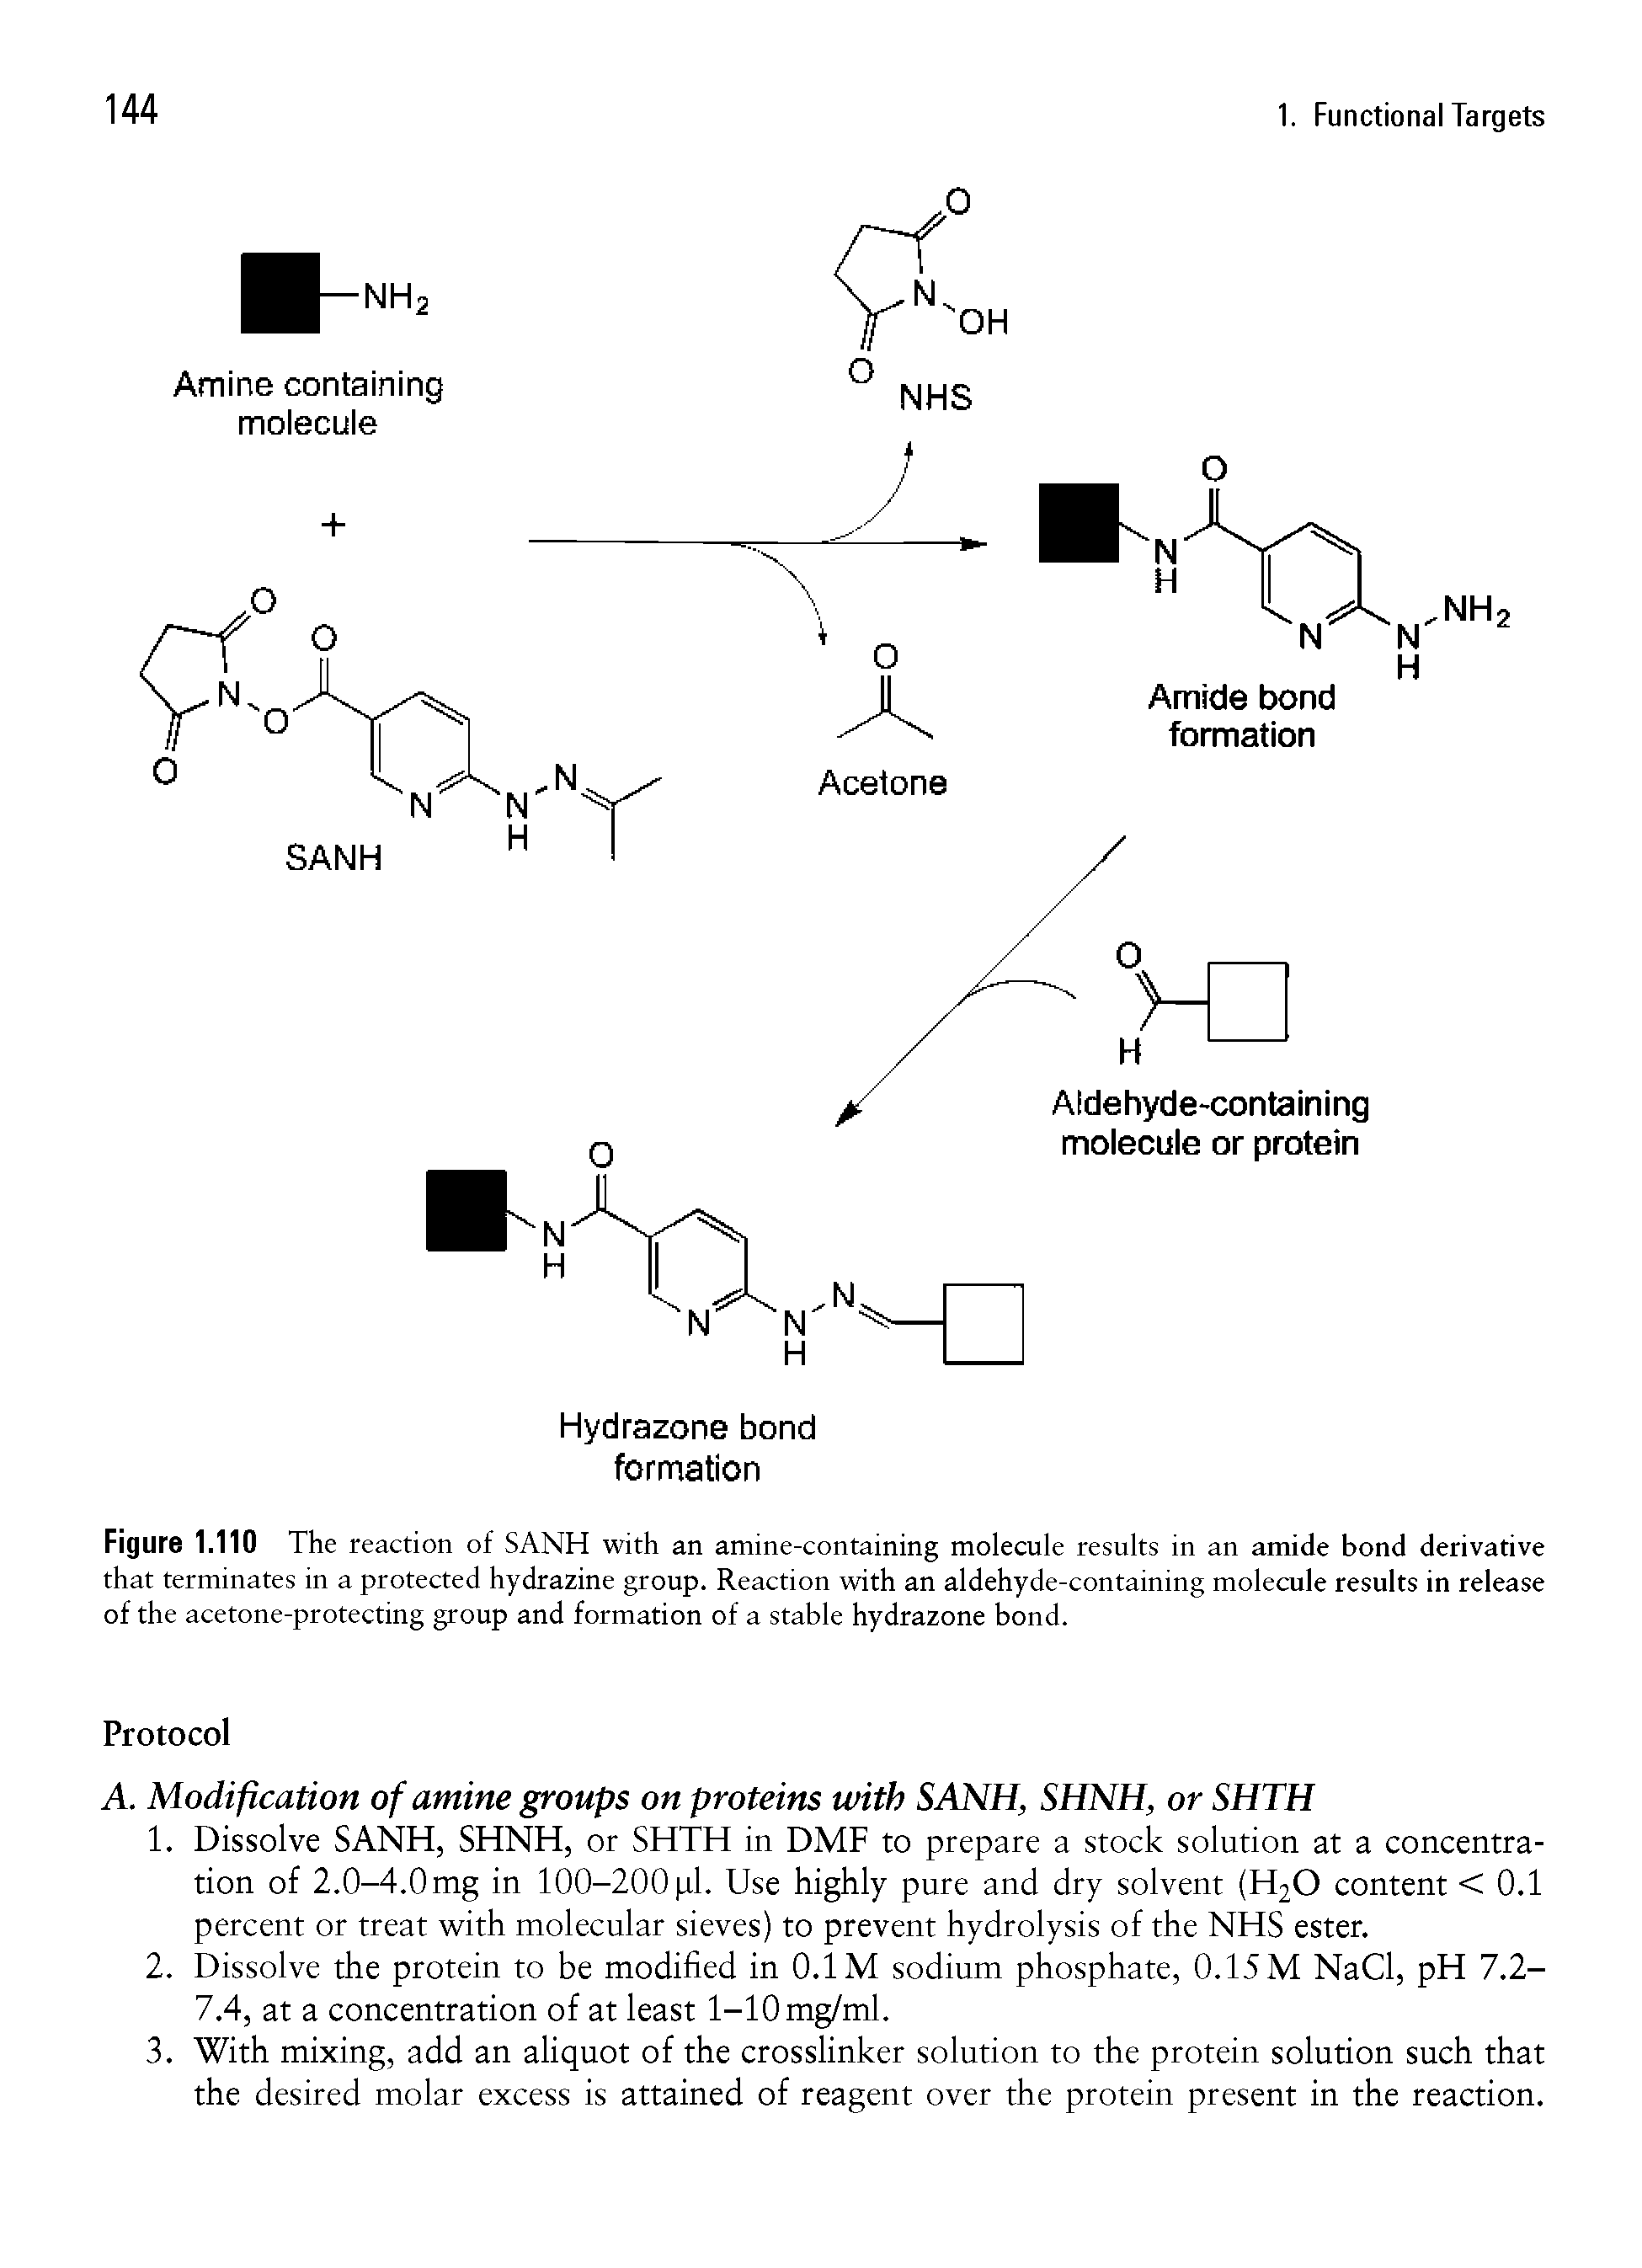 Figure 1.110 The reaction of SANH with an amine-containing molecule results in an amide bond derivative that terminates in a protected hydrazine group. Reaction with an aldehyde-containing molecule results in release of the acetone-protecting group and formation of a stable hydrazone bond.